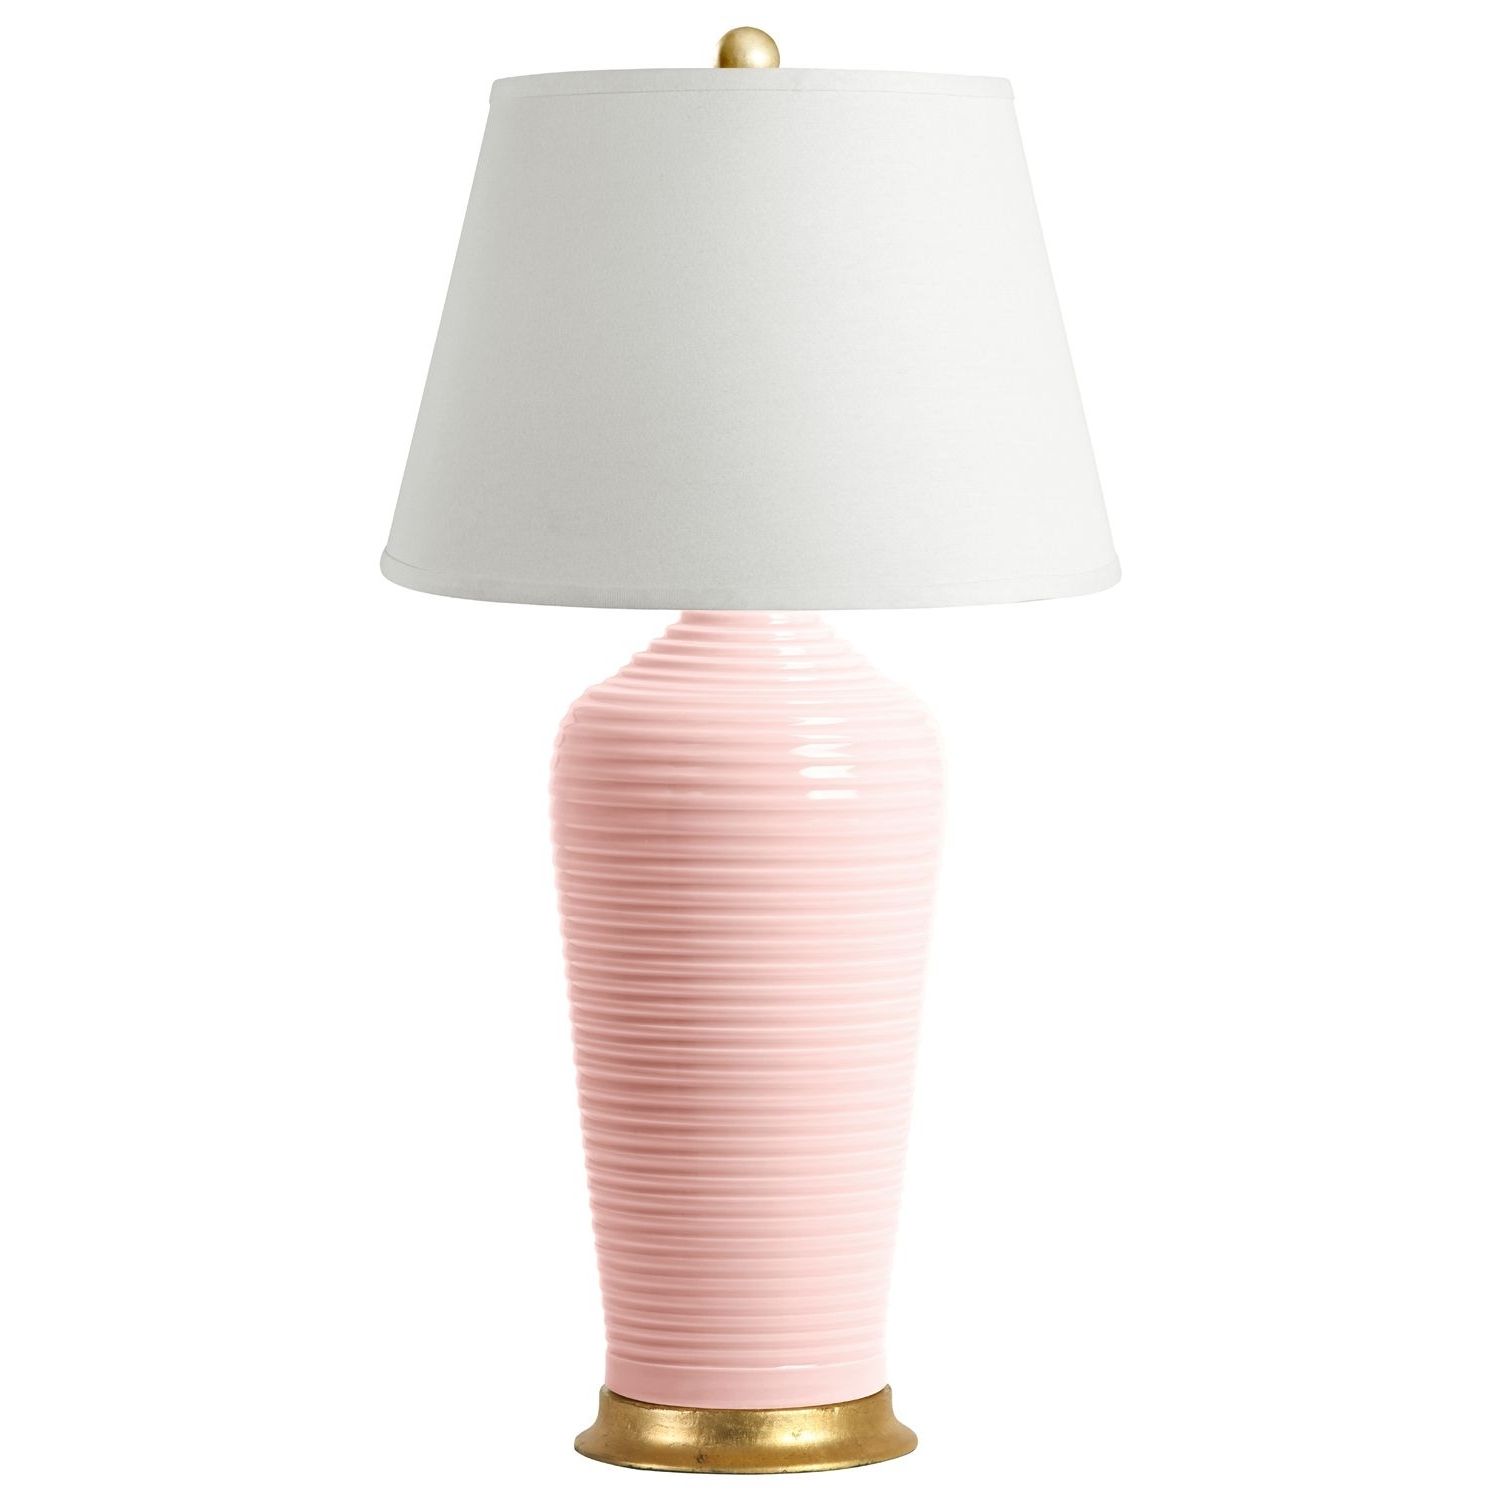 Pink Table Lamps For Living Room Within Most Current Remarkableable Lamps For Living Roomraditional Modern Cordless At (View 13 of 20)